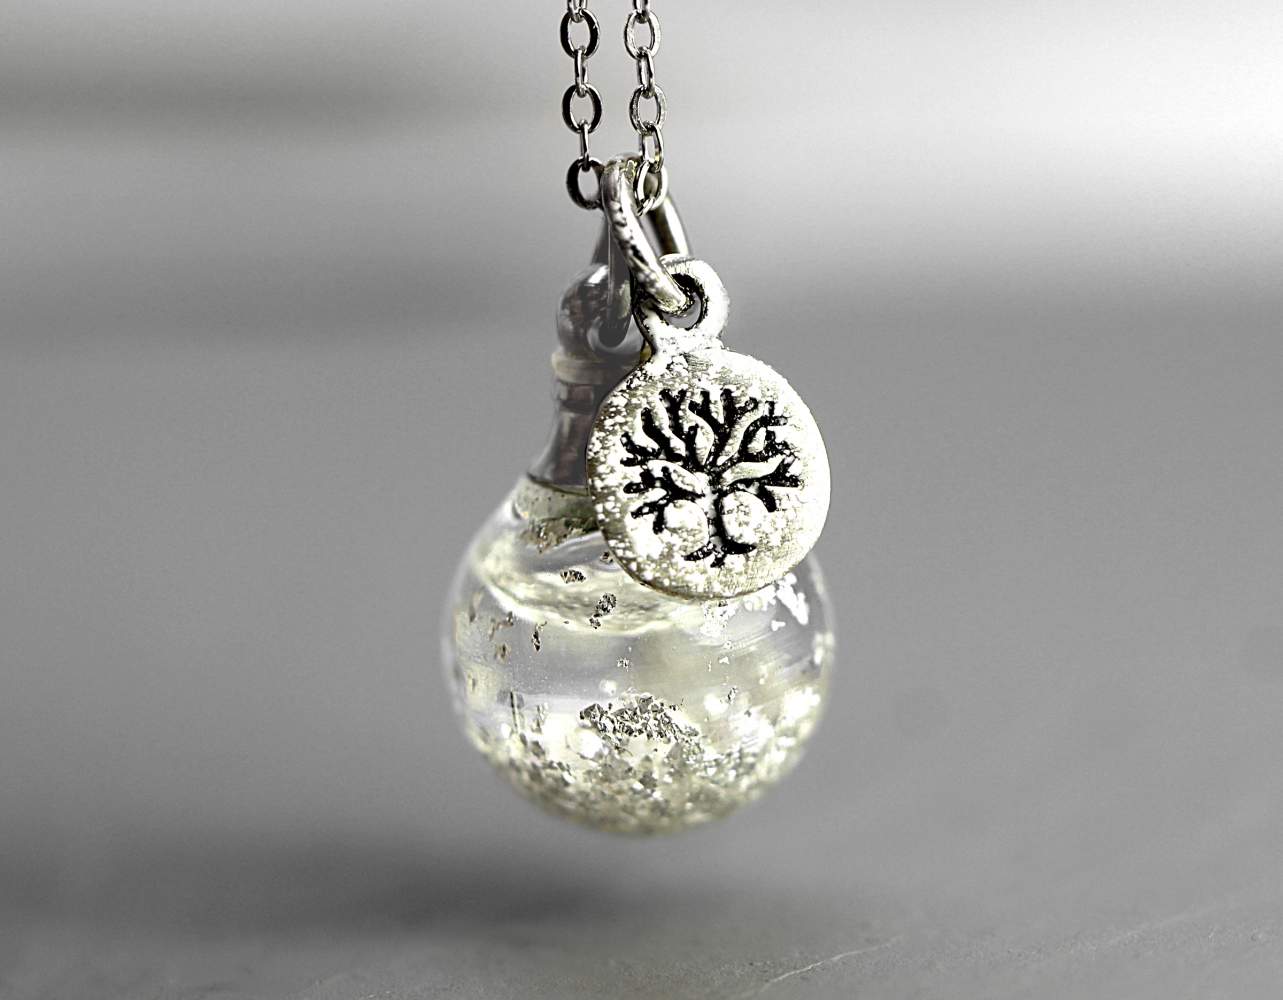 SNOW GLOBE winter necklace. Floating sterling pieces in liquid orb. Snowbound tiny tree. 925 silver.